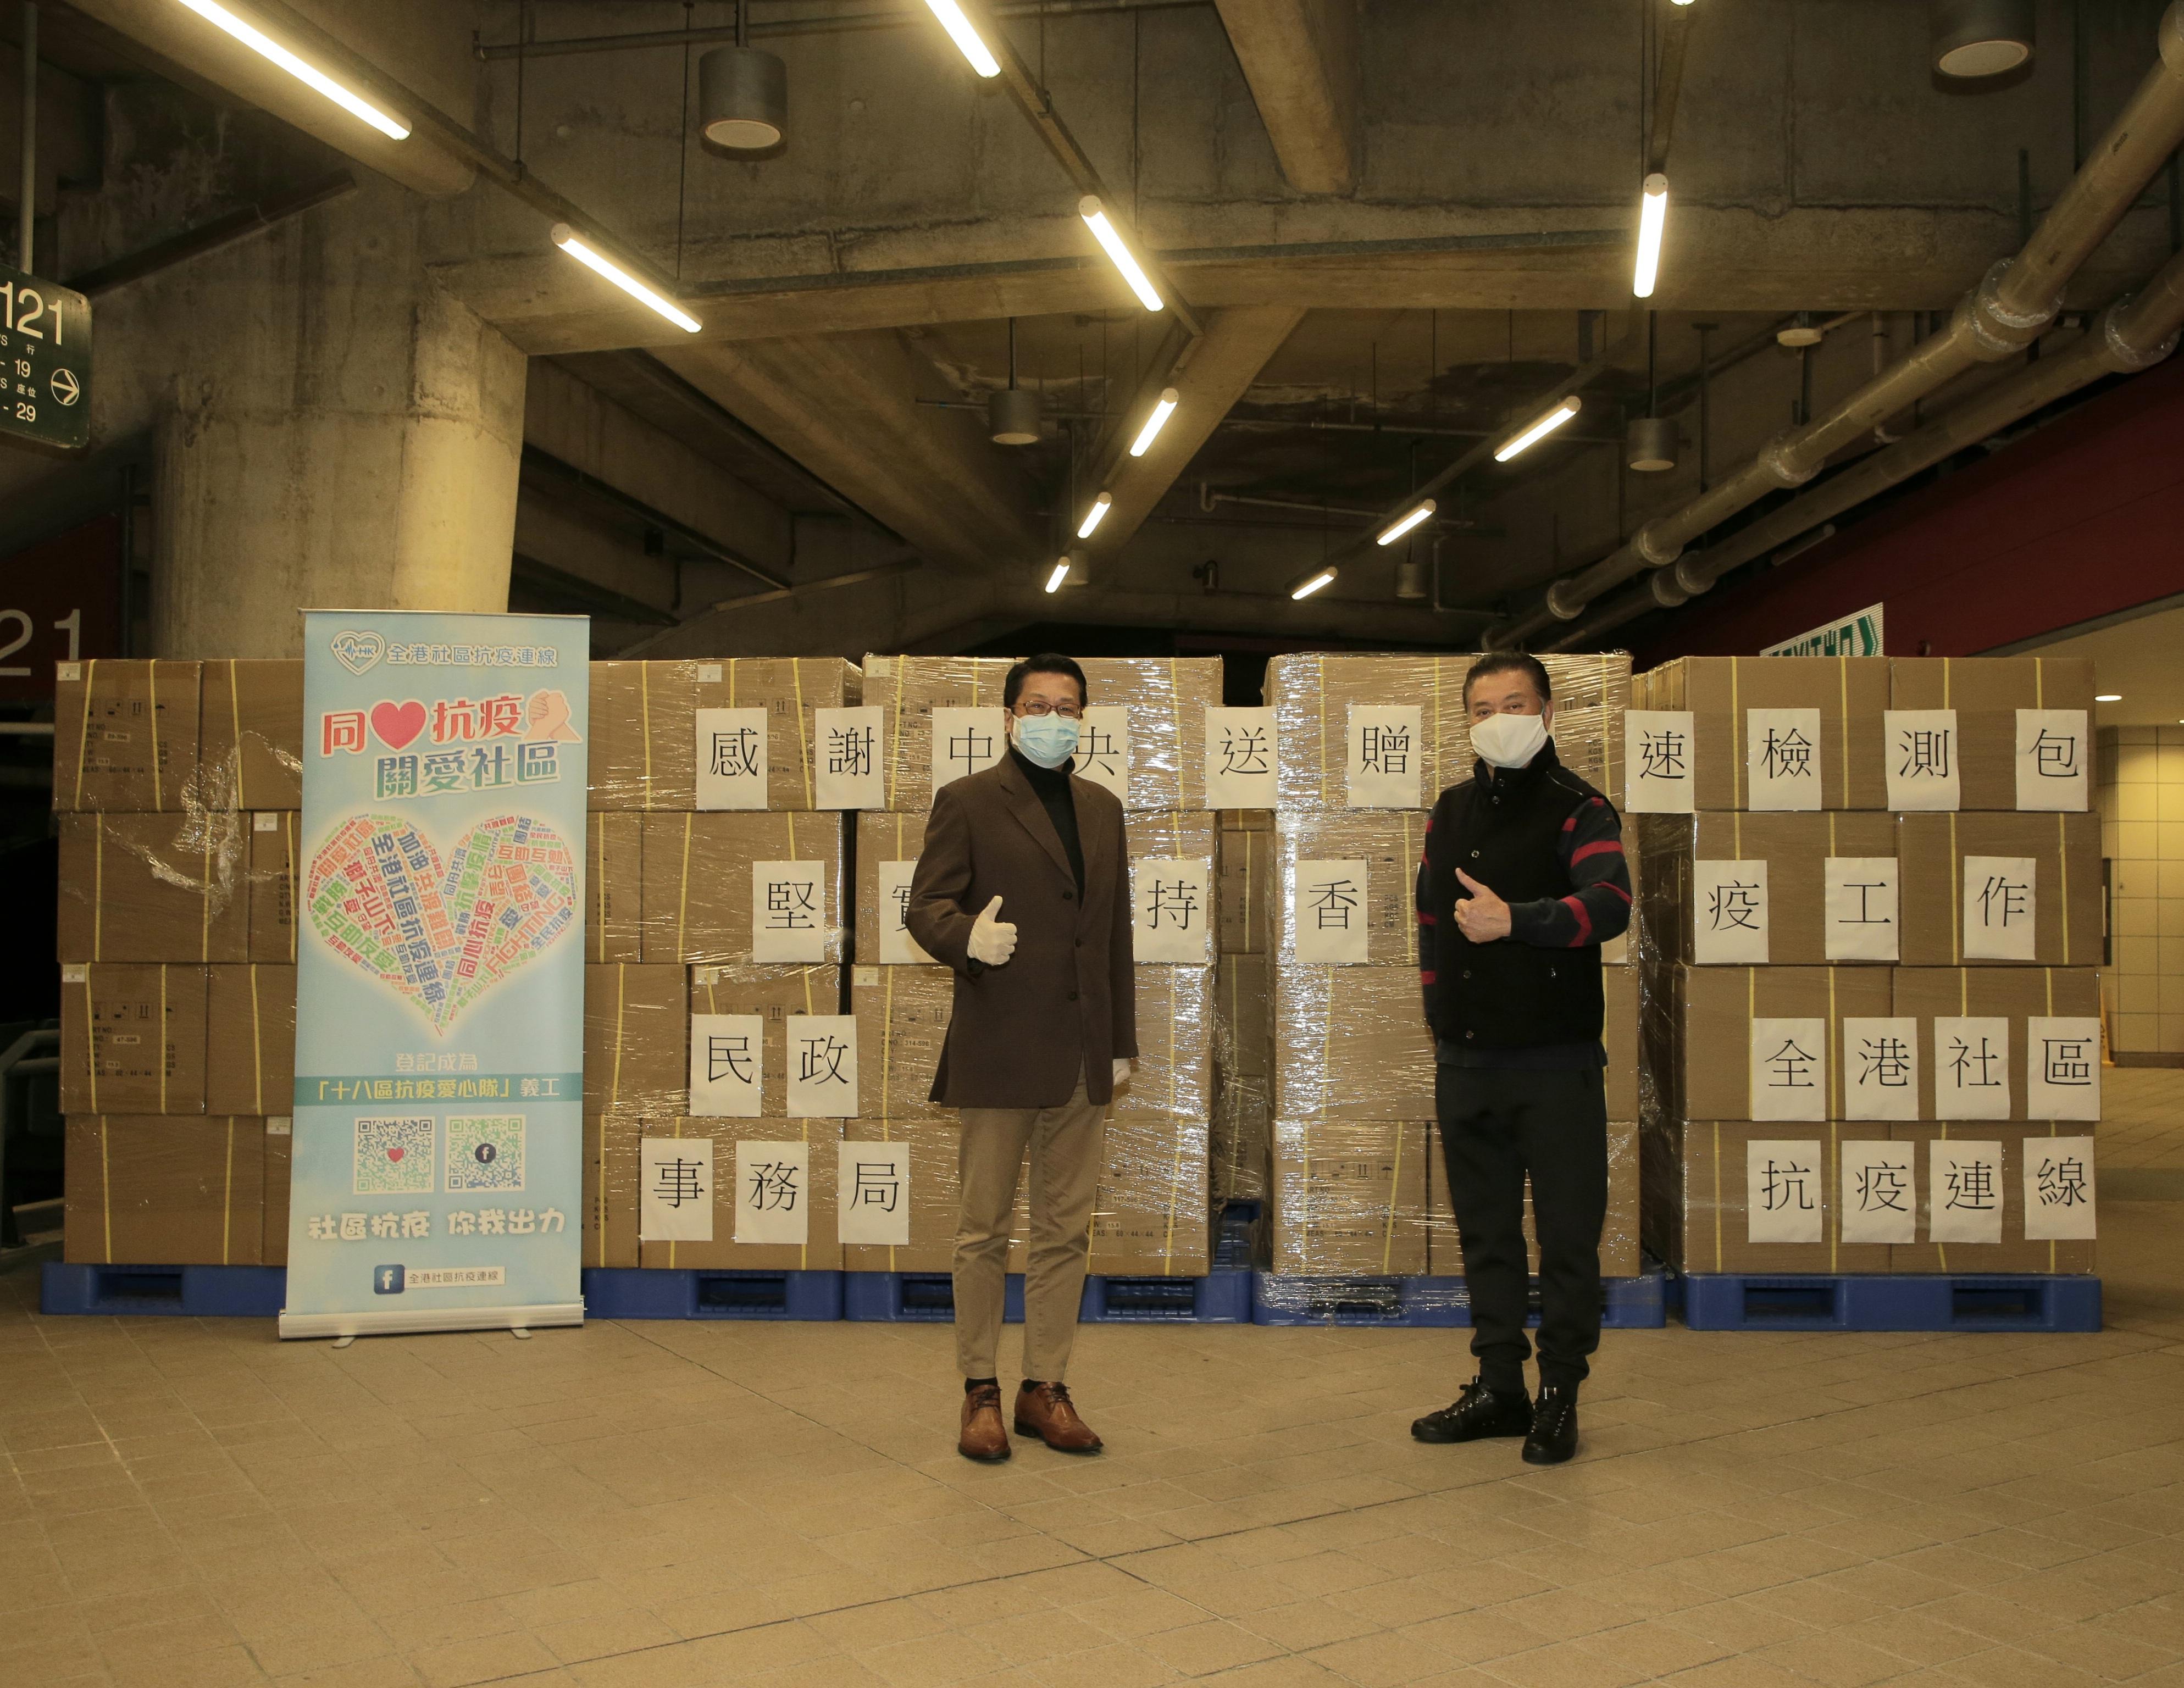 The Acting Secretary for Home Affairs, Mr Jack Chan, today (February 26) joined major organisations separately to distribute anti-epidemic supplies in several districts. He also delivered rapid antigen test kits from the Central Government to the Hong Kong Community Anti-Coronavirus Link. Photo shows Mr Chan (left) and the chief convenor of the Hong Kong Community Anti-Coronavirus Link, Dr Bunny Chan (right) at the presentation at the Hong Kong Stadium.
